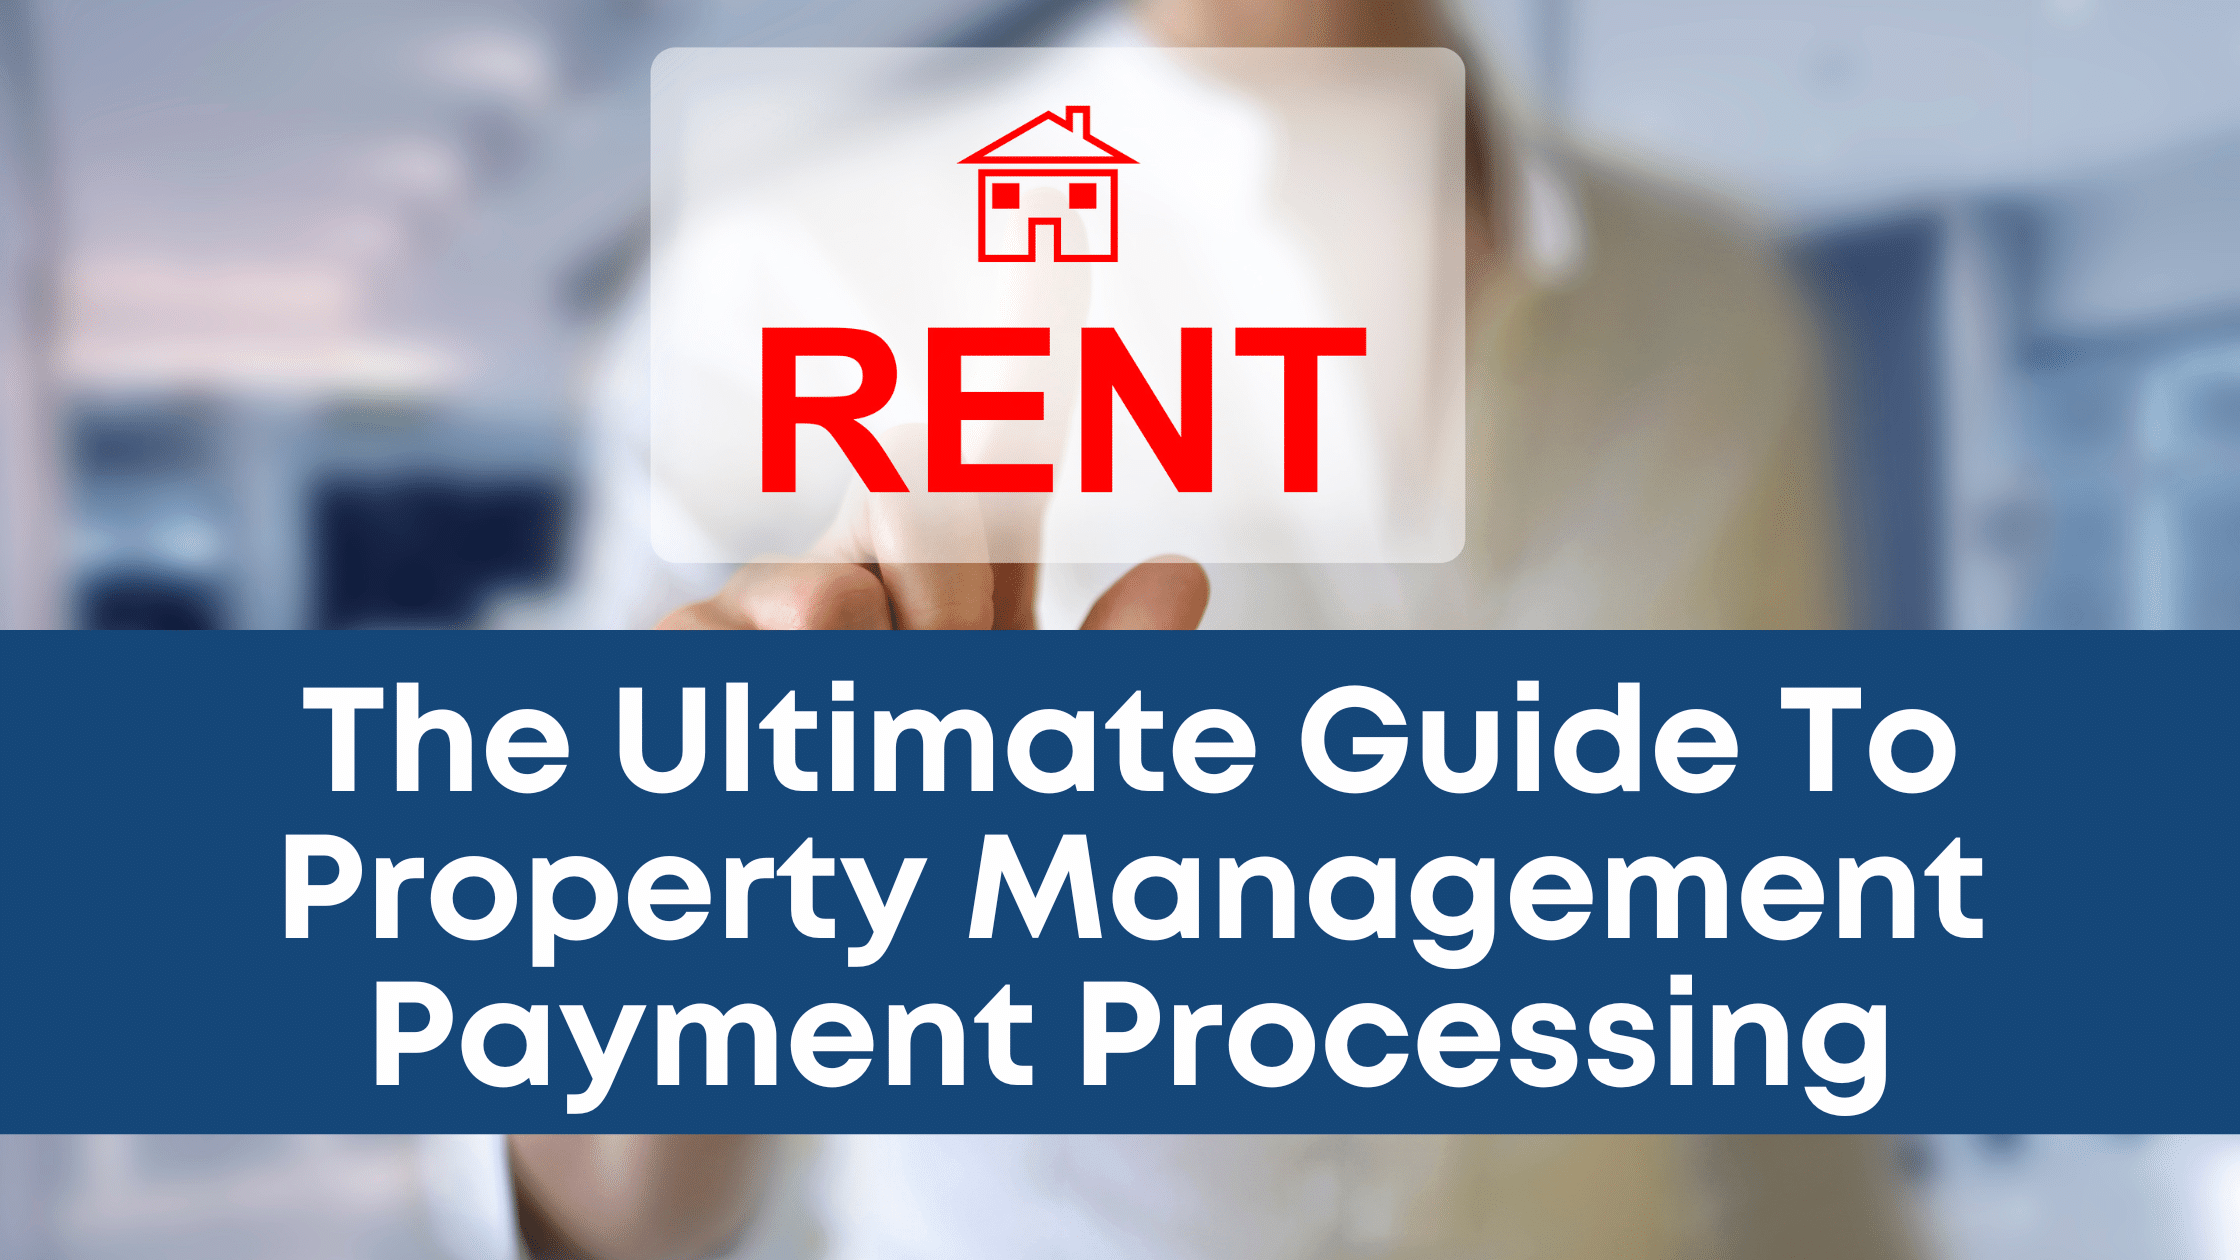 The Ultimate Guide To Landlord & Property Management Payment Processing